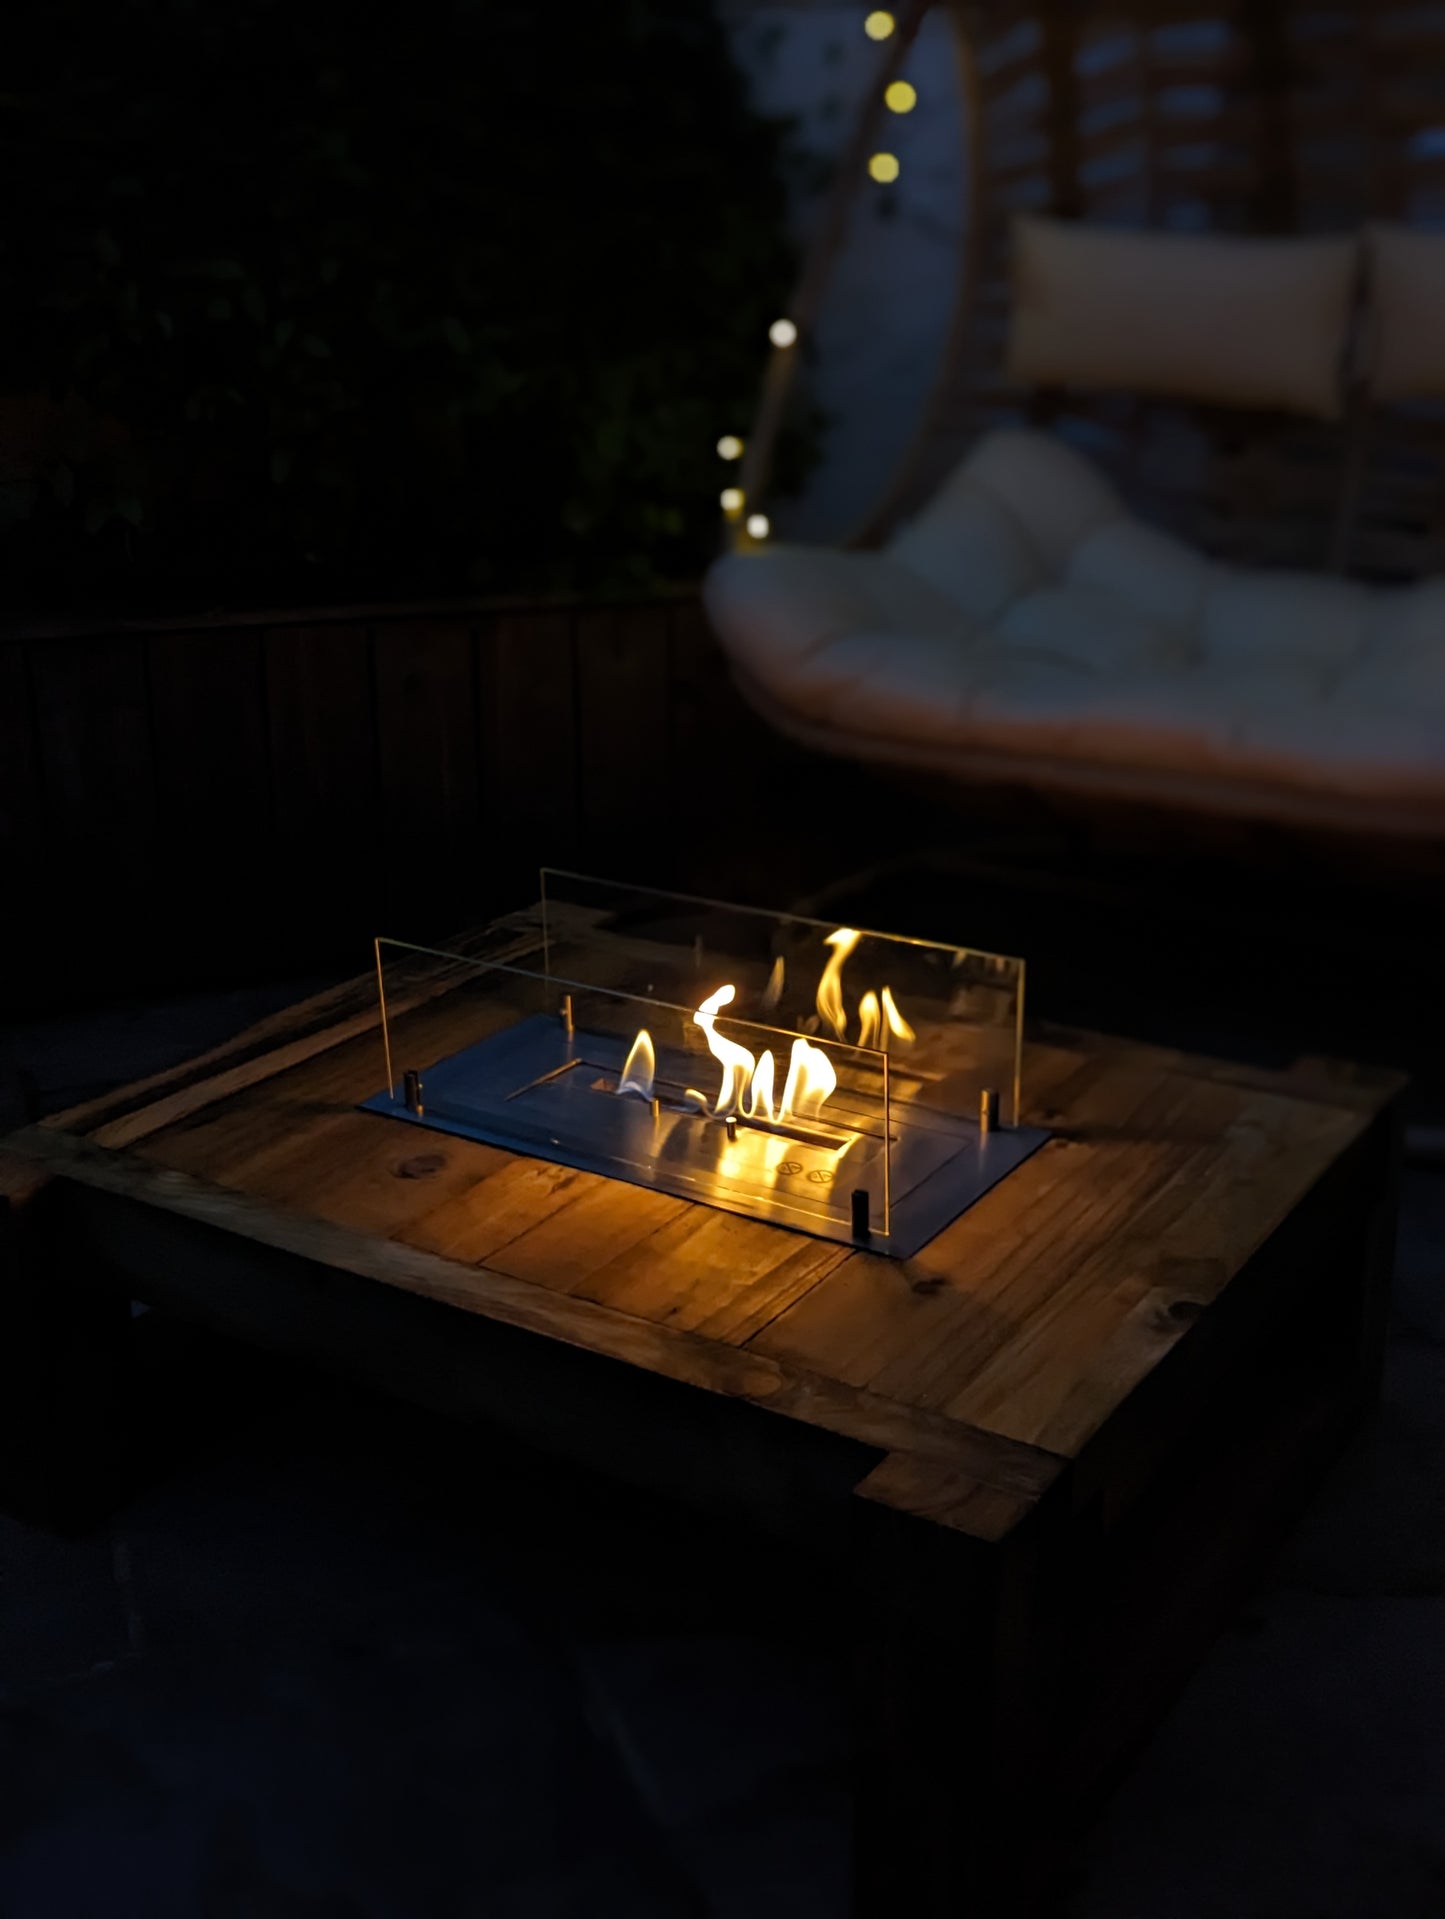 Firepit table